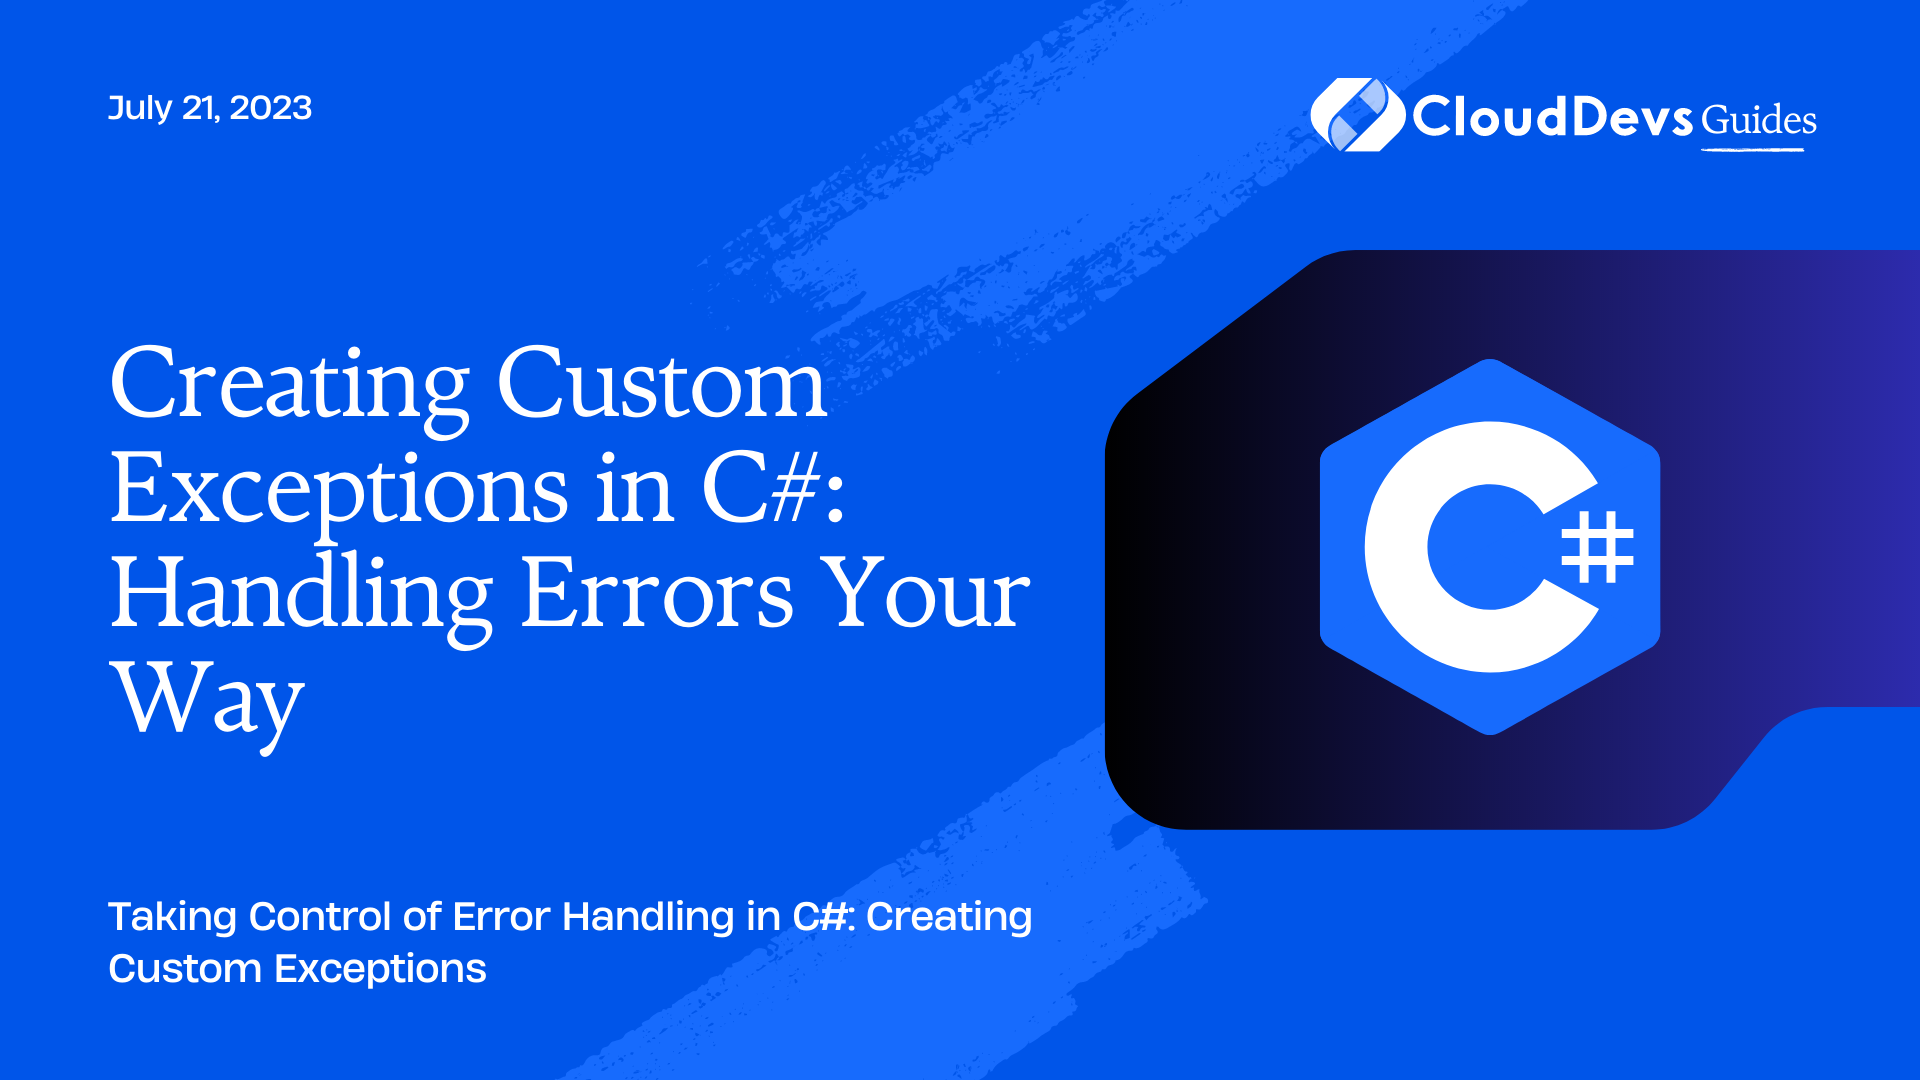 Creating Custom Exceptions in C#: Handling Errors Your Way